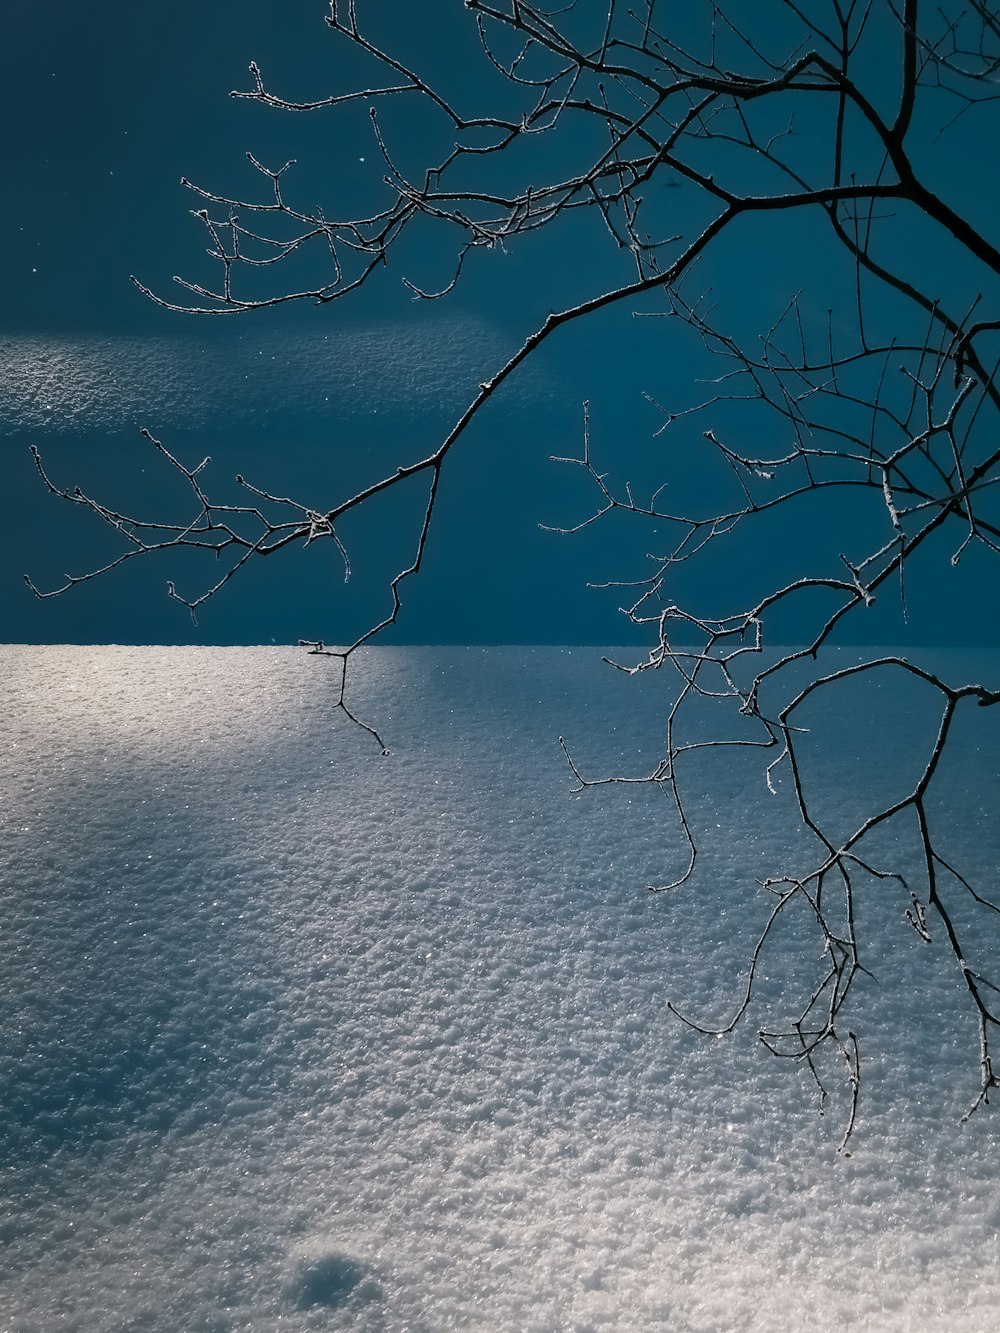 a snow covered ground with a tree branch in the foreground